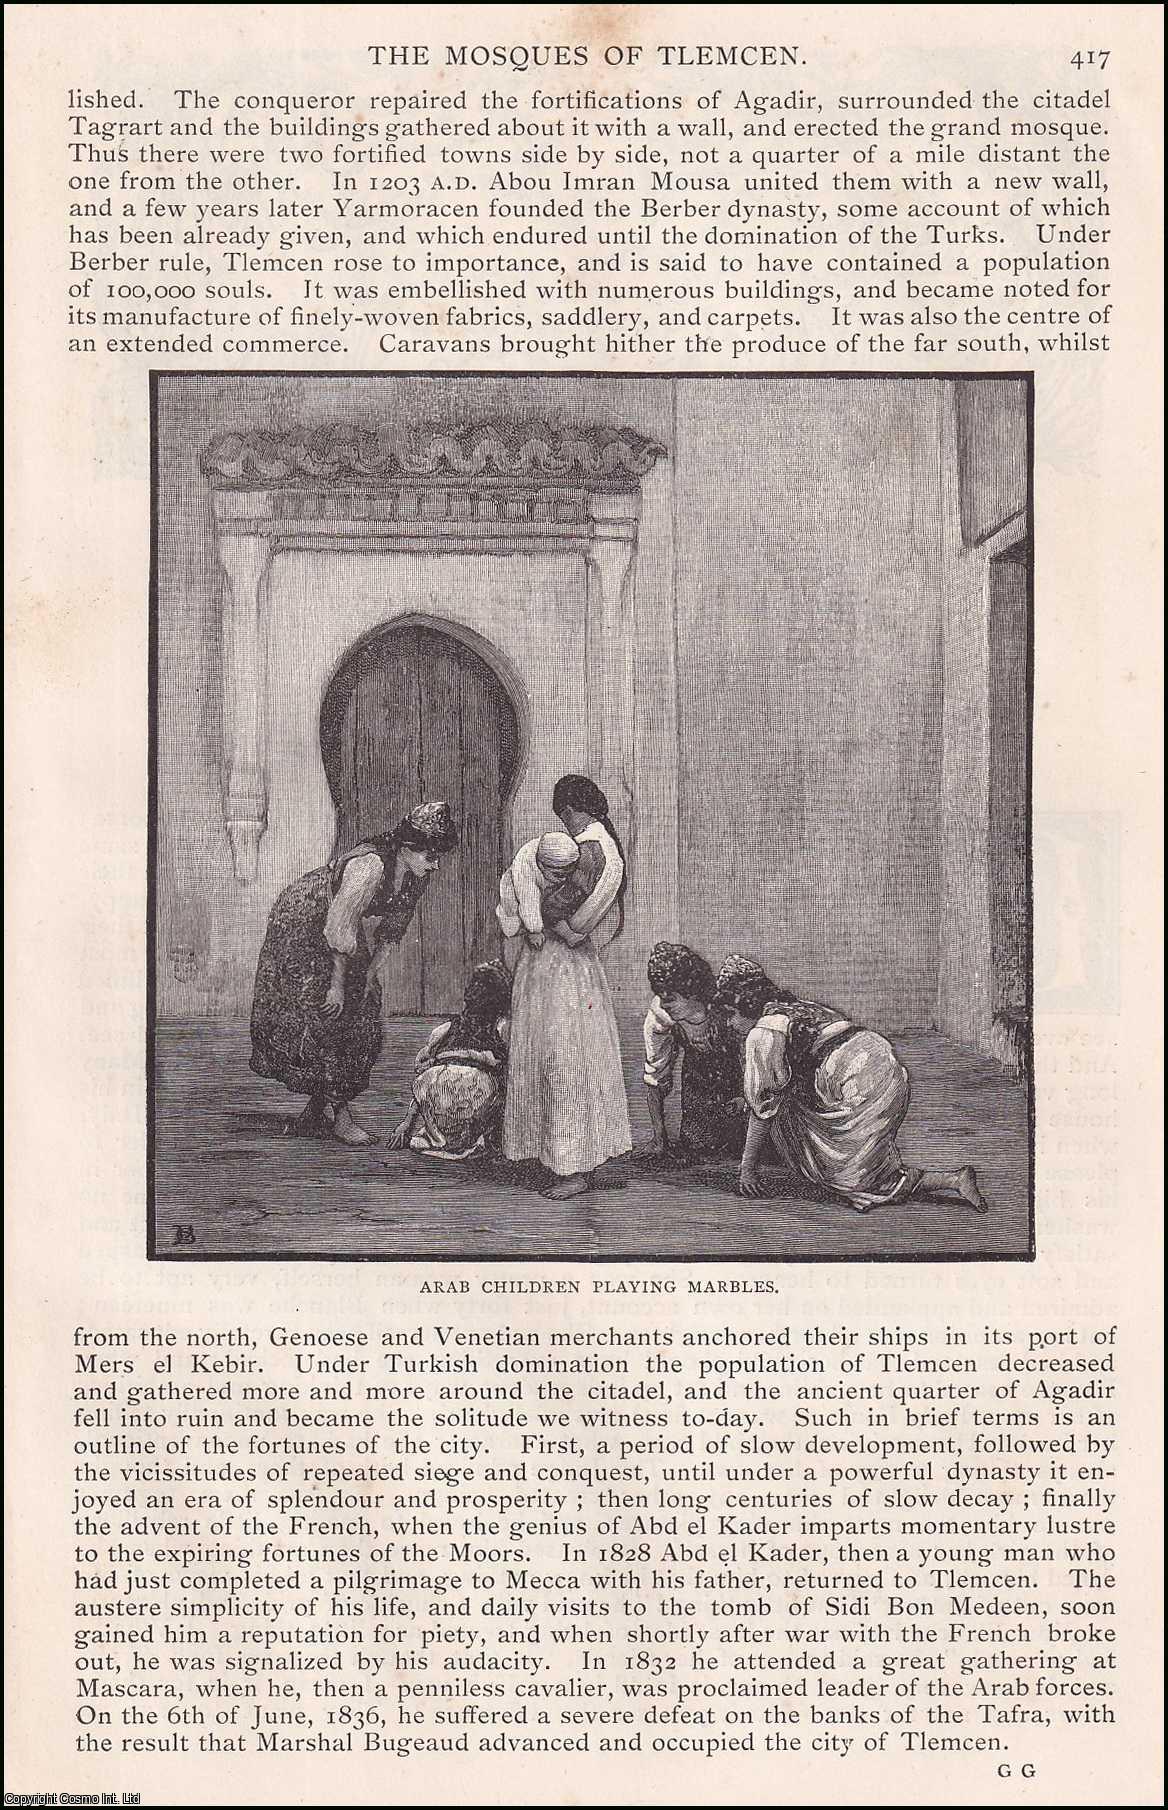 Written and Illustrated by Edgar Barclay - The Mosques of Tlemcen, Algeria. An original article from the English Illustrated Magazine, 1892.